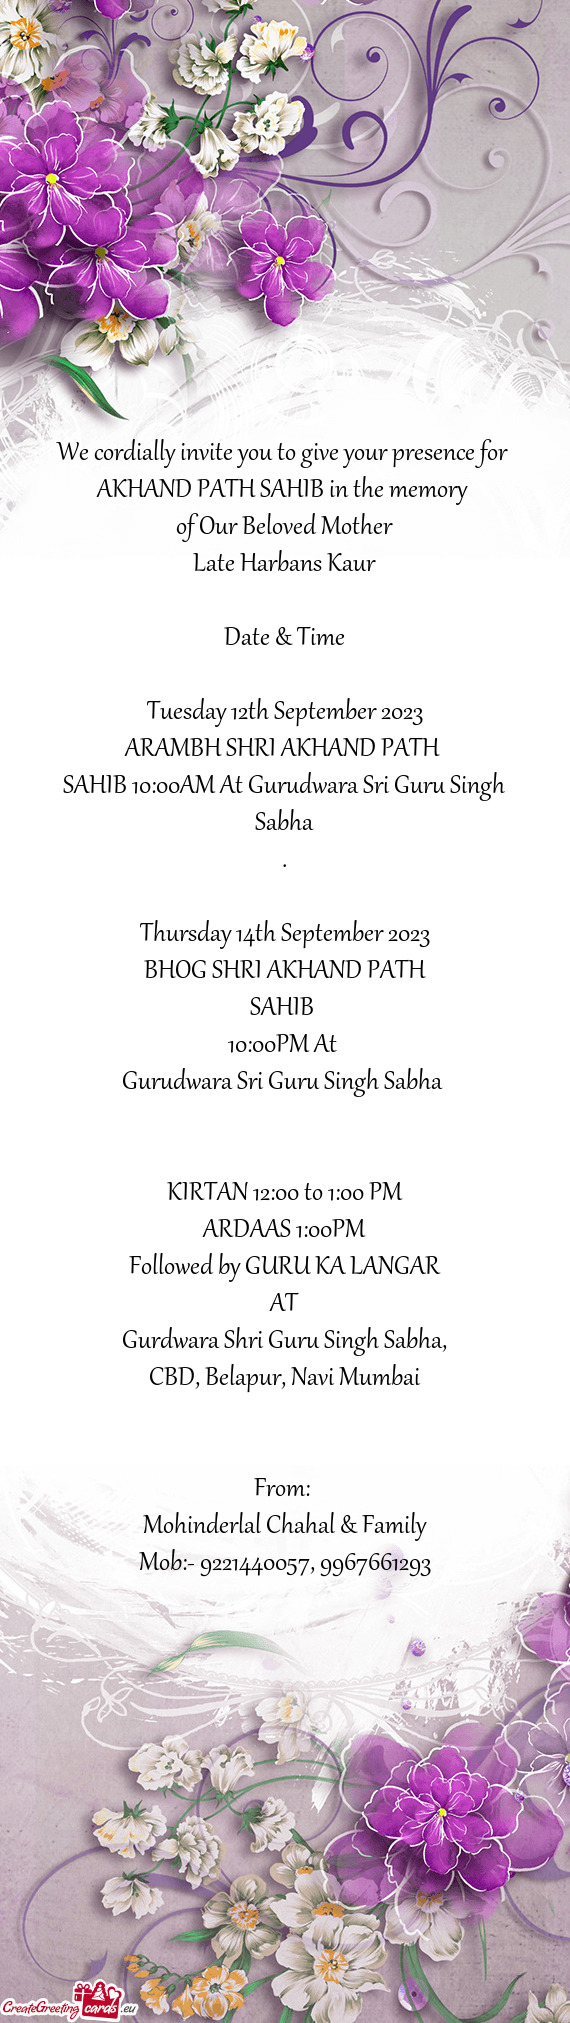 We cordially invite you to give your presence for AKHAND PATH SAHIB in the memory